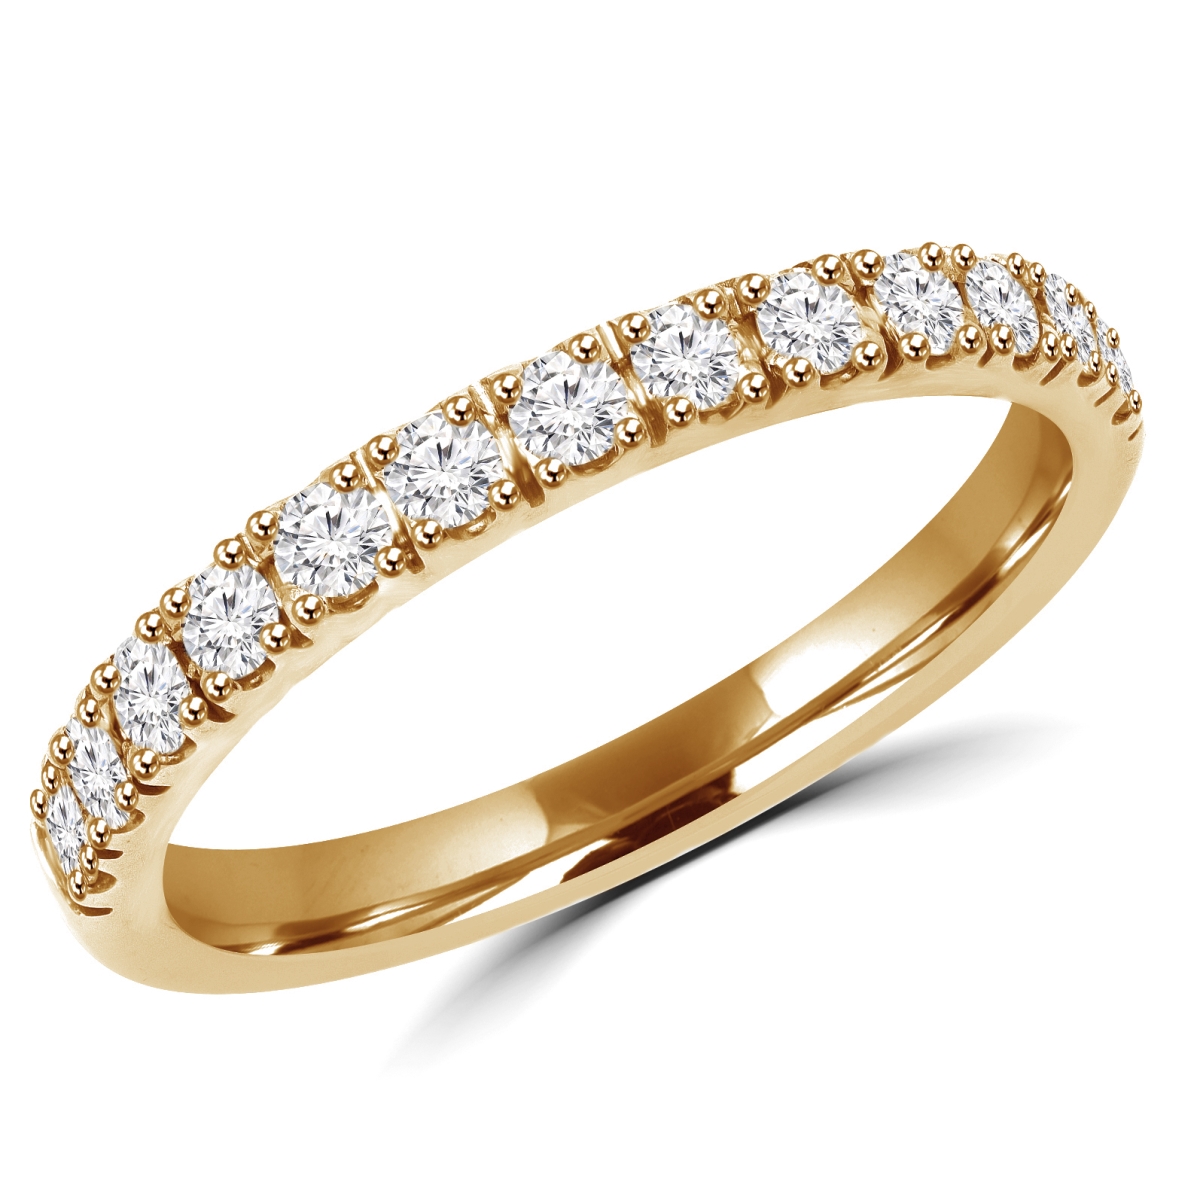 Picture of Majesty Diamonds MD180187-5 0.3 CTW Round Diamond Semi-Eternity Wedding Band Ring in 14K Yellow Gold - Size 5